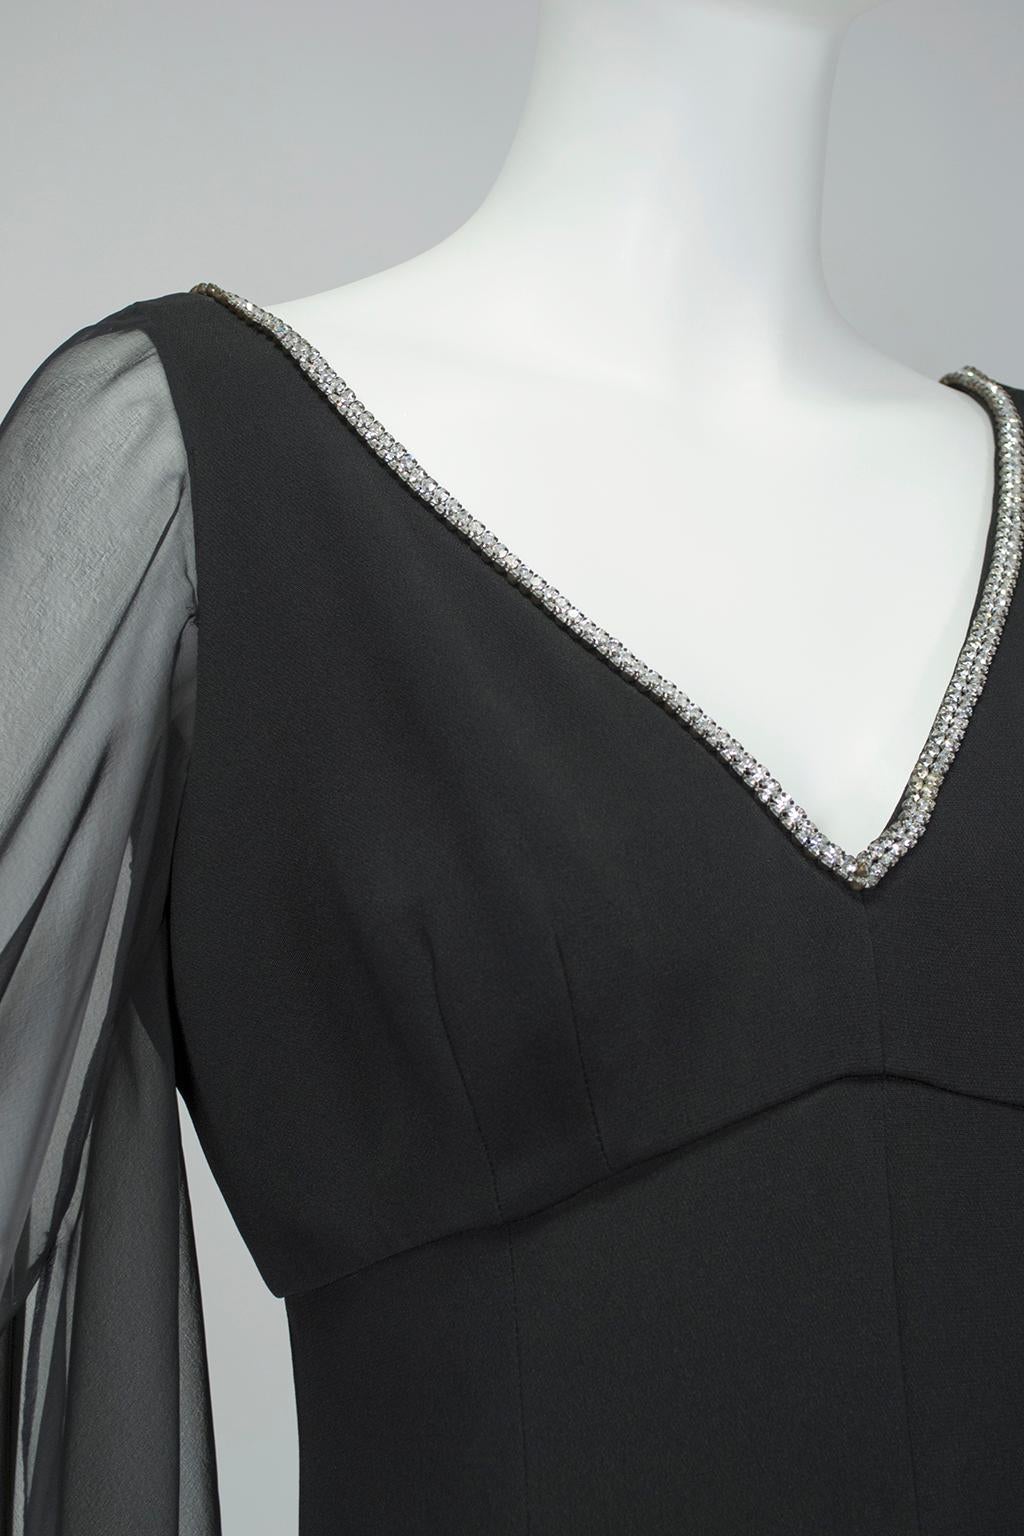 Lillie Rubin Black Sheer Angel Wing Gown with Rhinestone Plunge - Small, 1960s For Sale 1